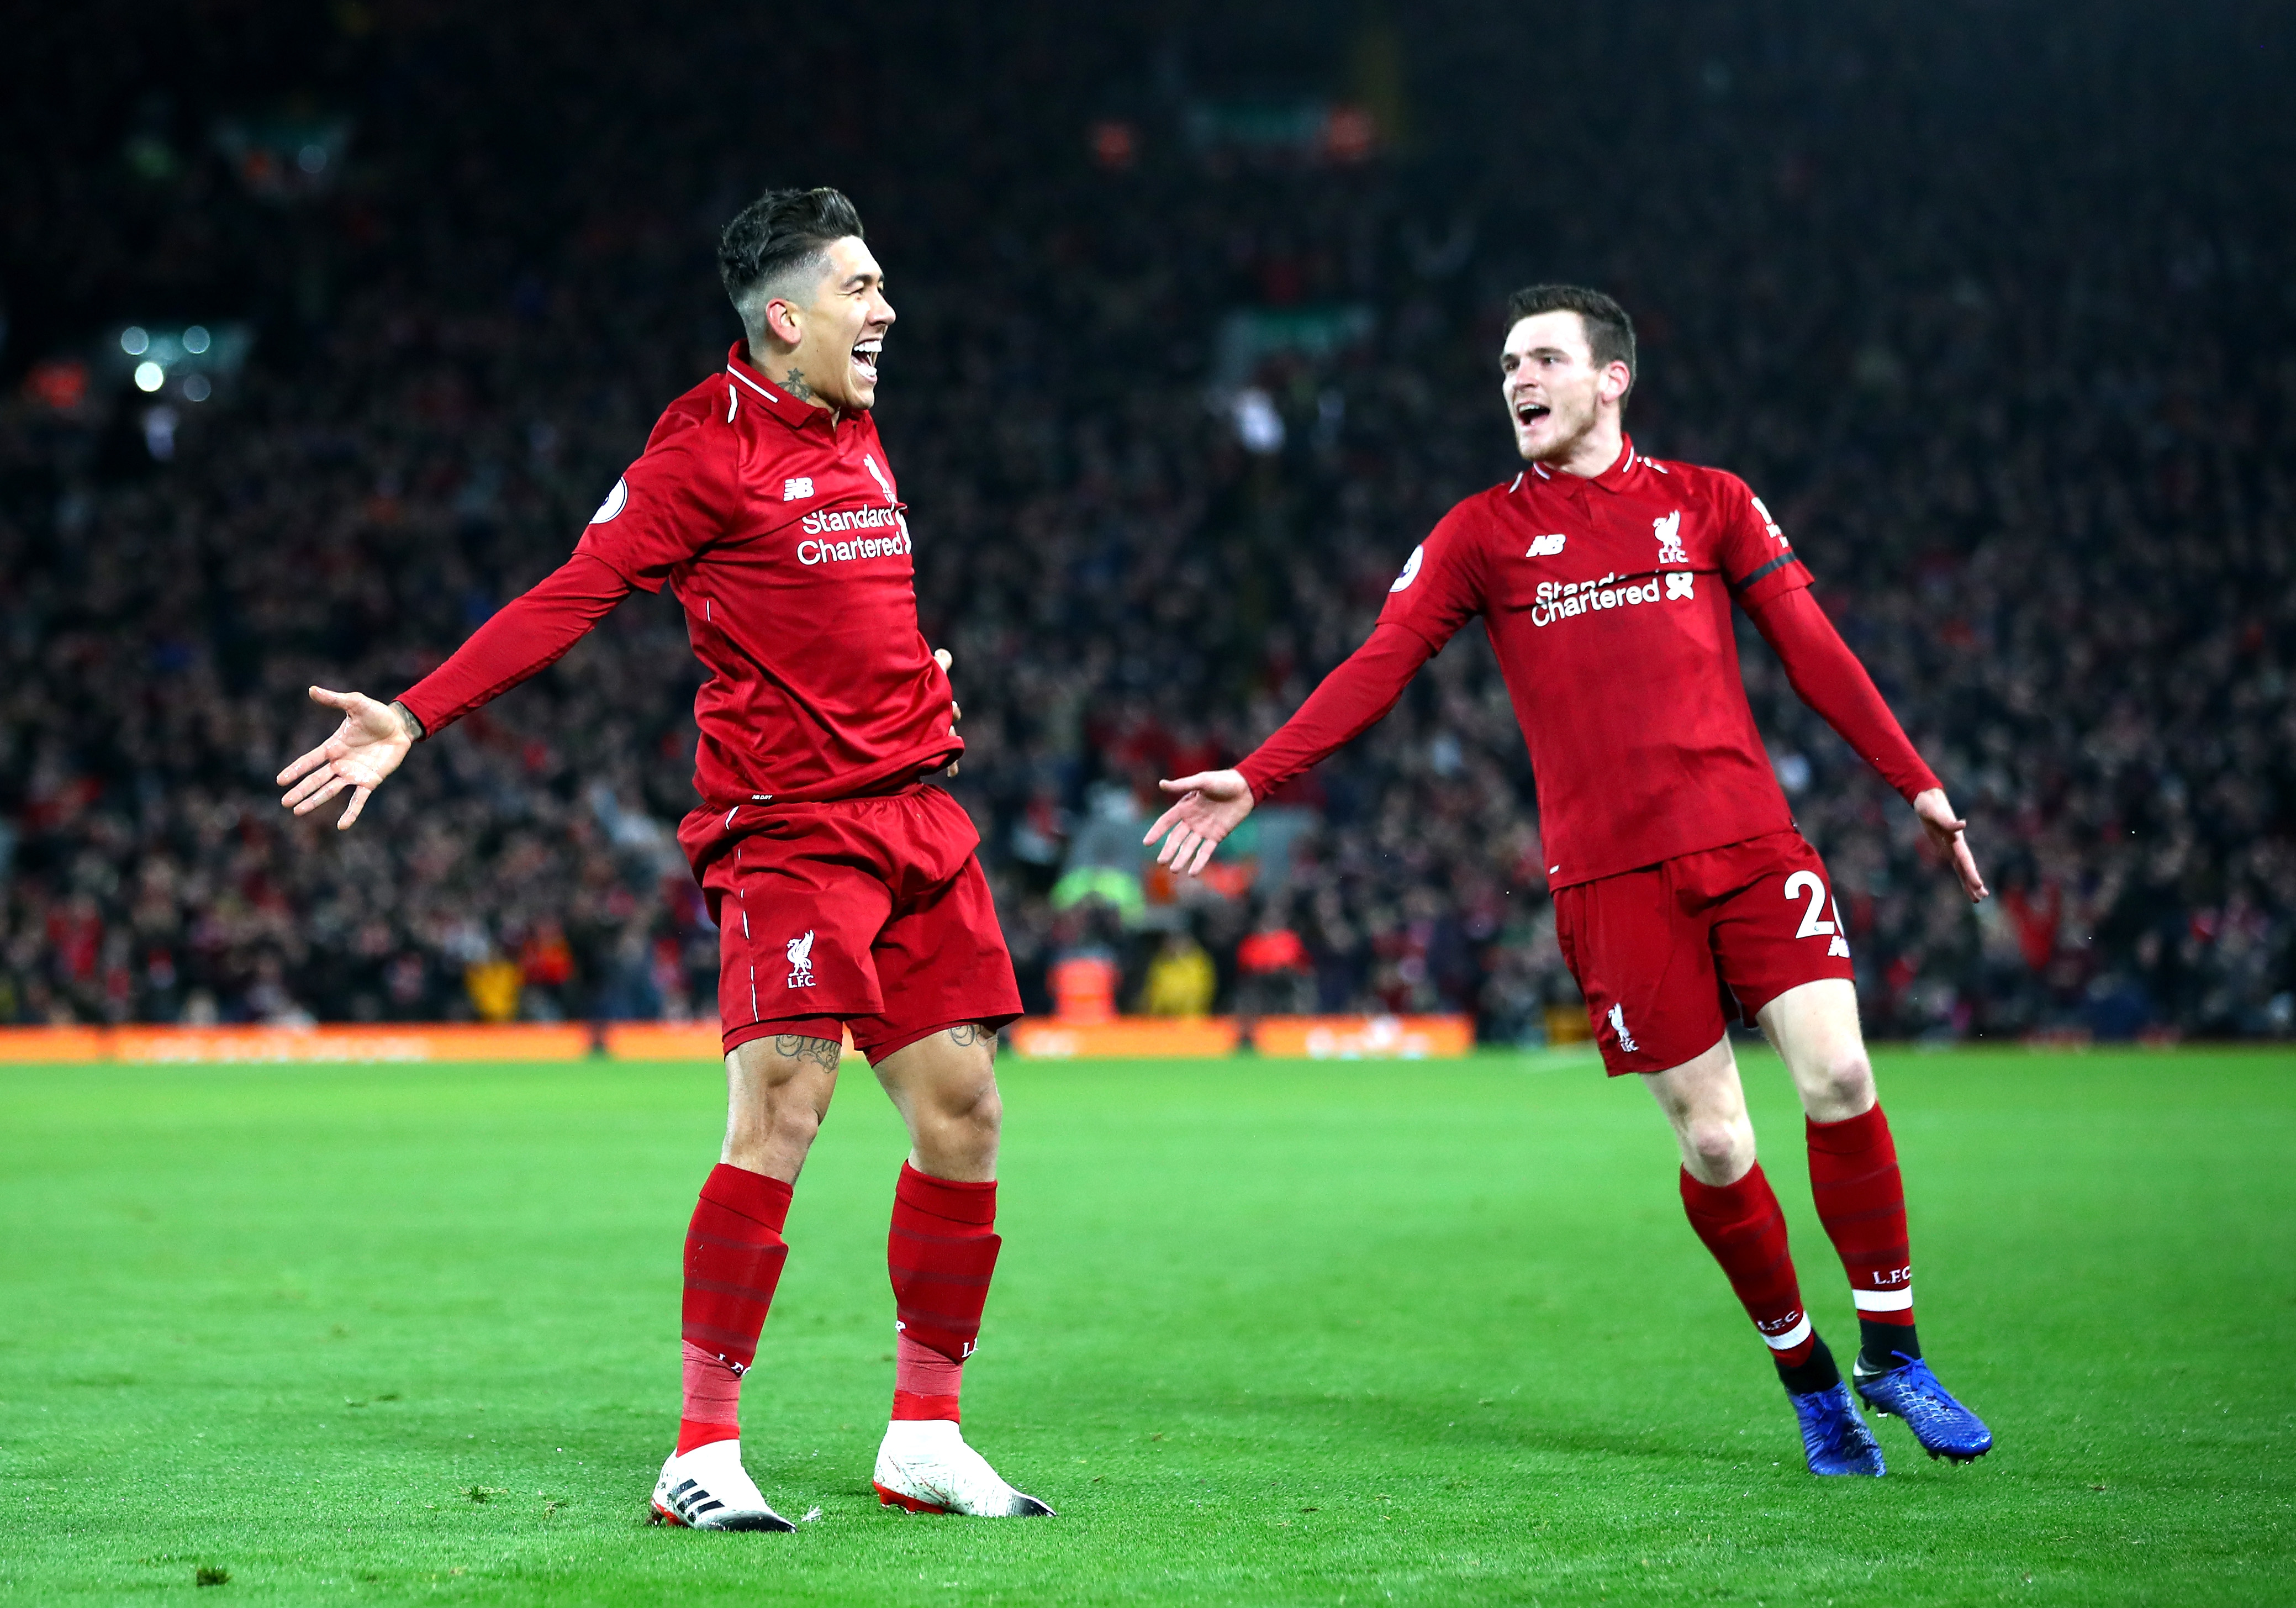 LIVERPOOL, ENGLAND - DECEMBER 29:  Roberto Firmino of Liverpool celebrates with Andy Robertson after scoring his sides second goal during the Premier League match between Liverpool FC and Arsenal FC at Anfield on December 29, 2018 in Liverpool, United Kingdom.  (Photo by Clive Brunskill/Getty Images)